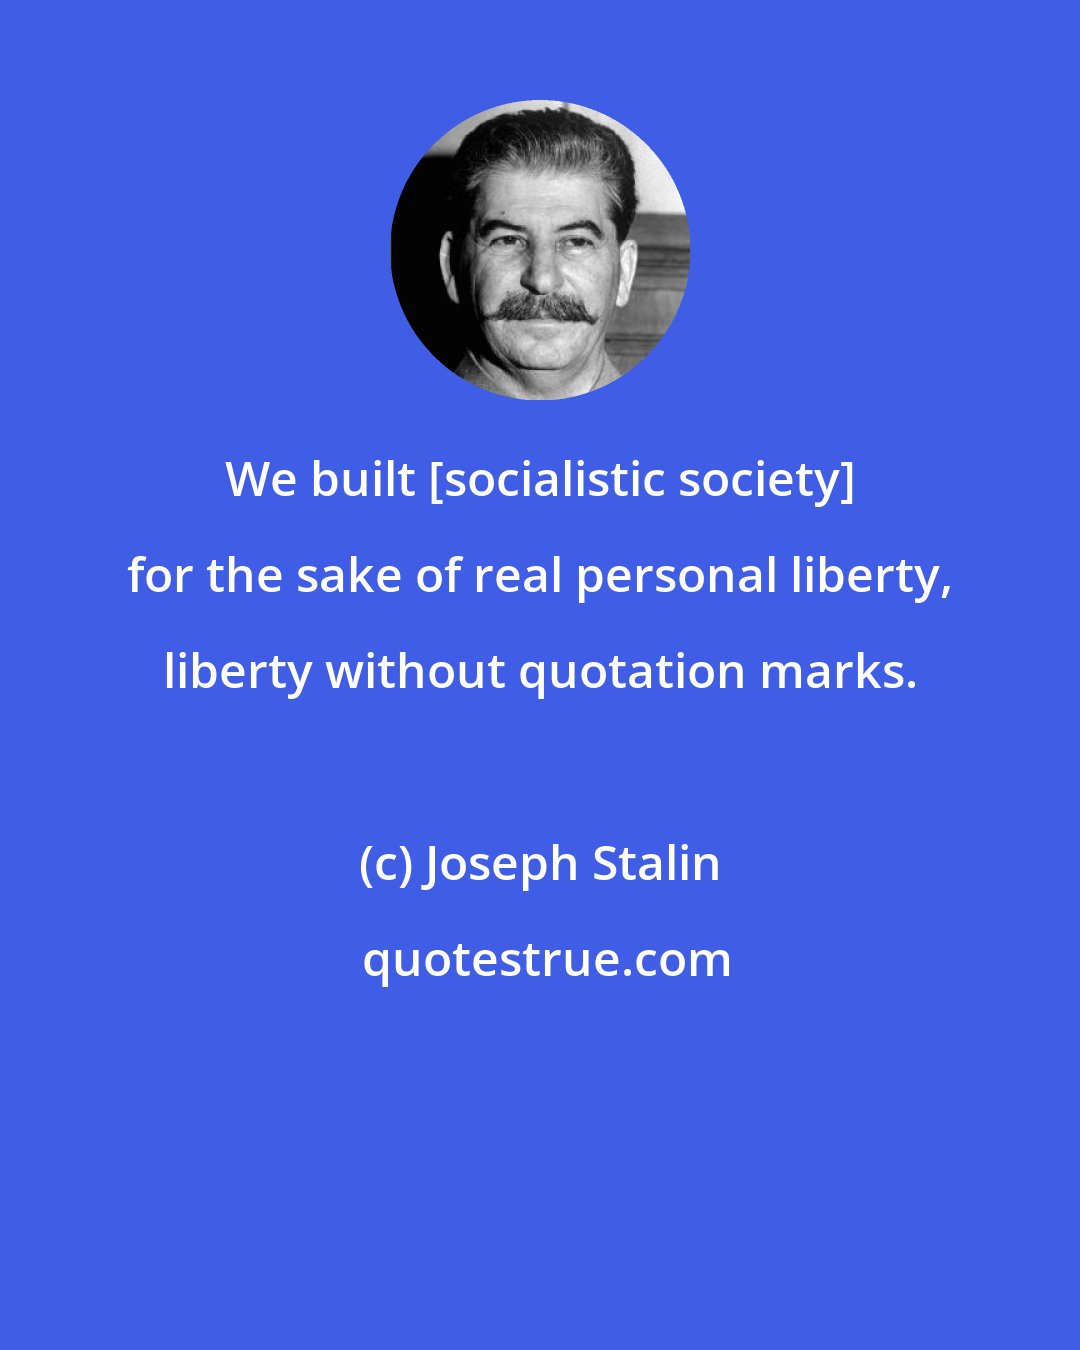 Joseph Stalin: We built [socialistic society] for the sake of real personal liberty, liberty without quotation marks.